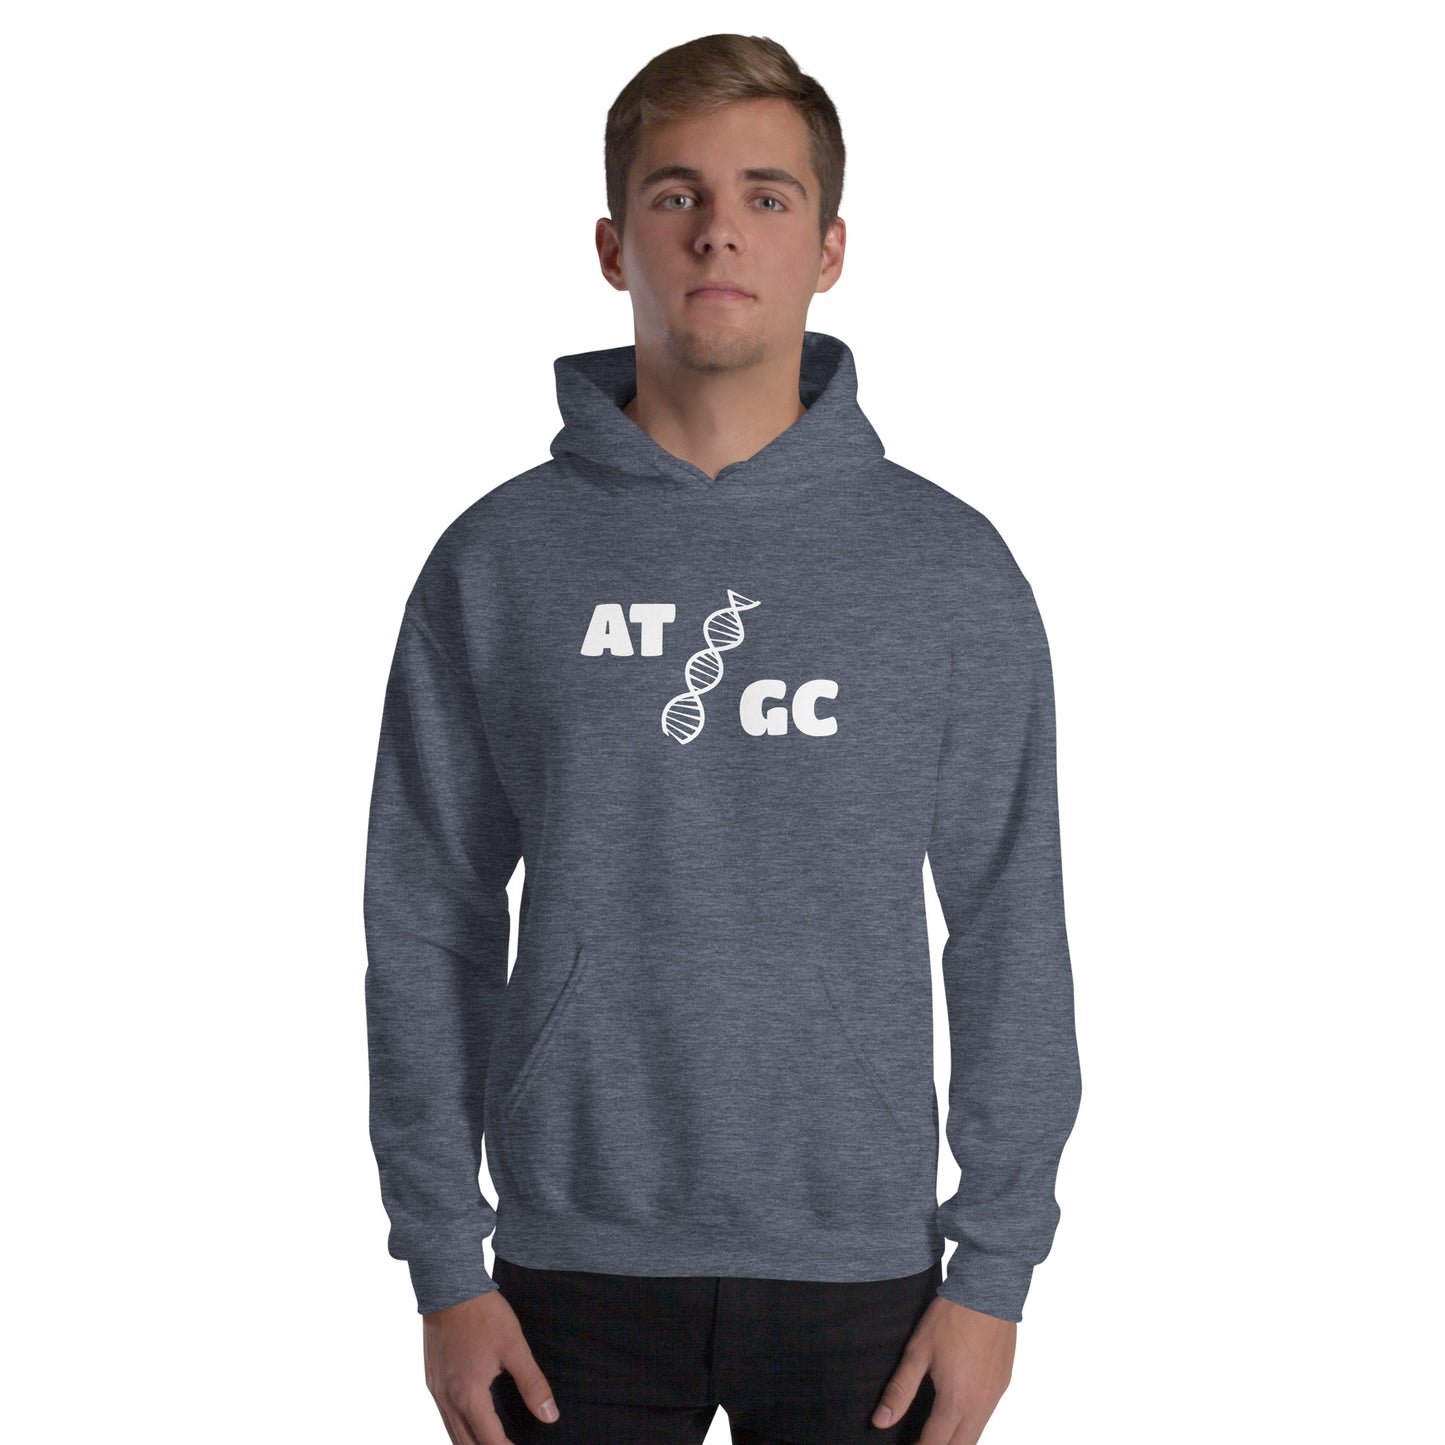 Men with dark navy blue hoodie with image of a DNA string and the text "ATGC"